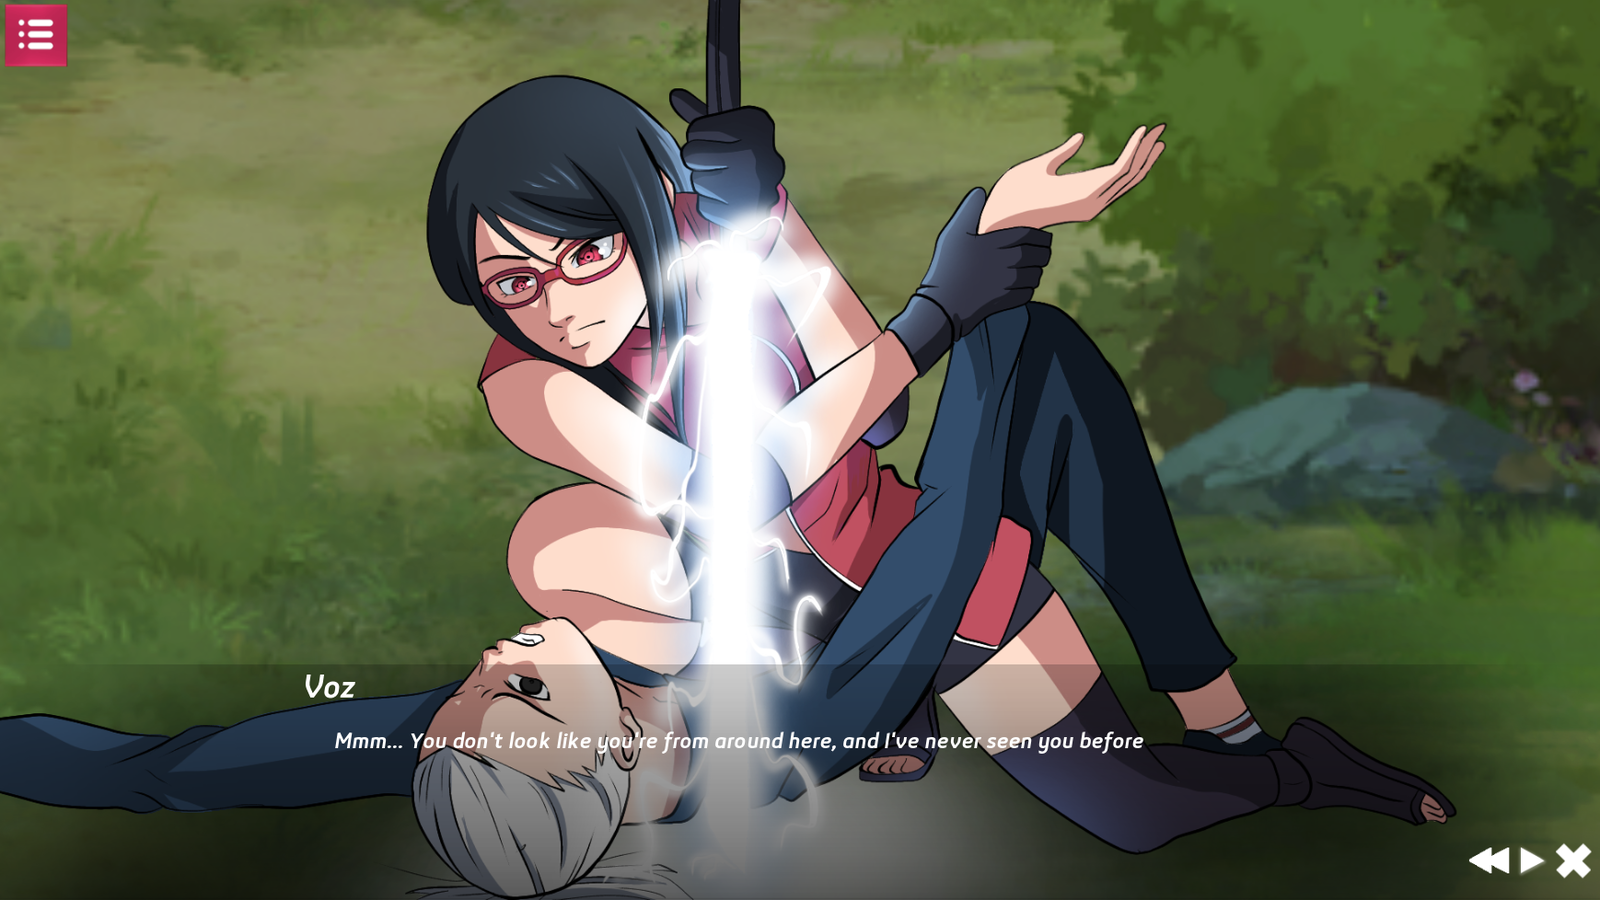 Assistir Boruto APK for Android Download